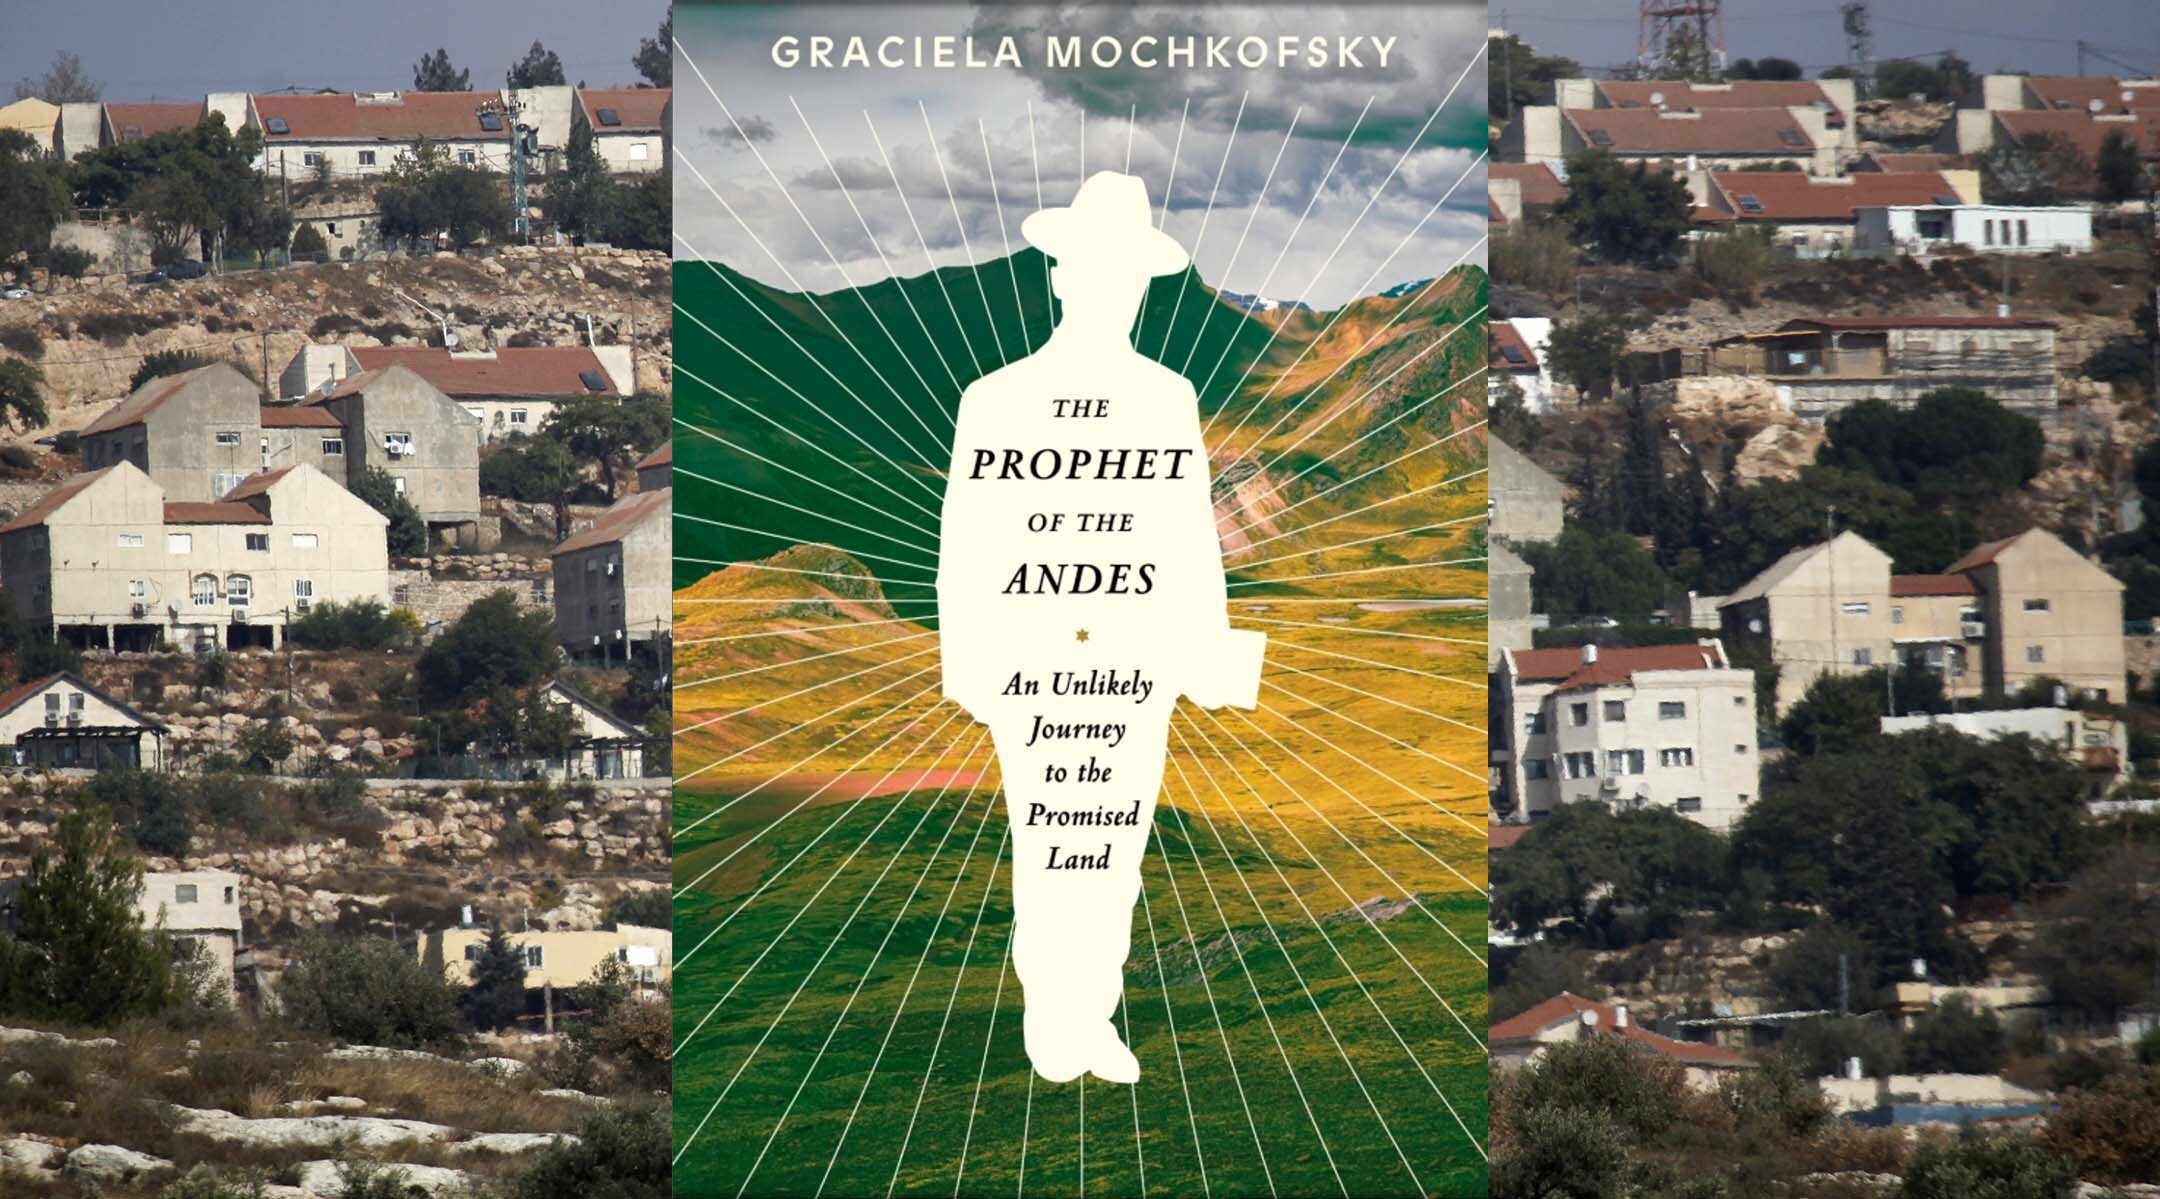 “The Prophet of the Andes: An Unlikely Journey to the Promised Land,” by Graciela Mochkofsky, traces the saga of a group of Peruvian Jews.(Knopf/Getty Images)